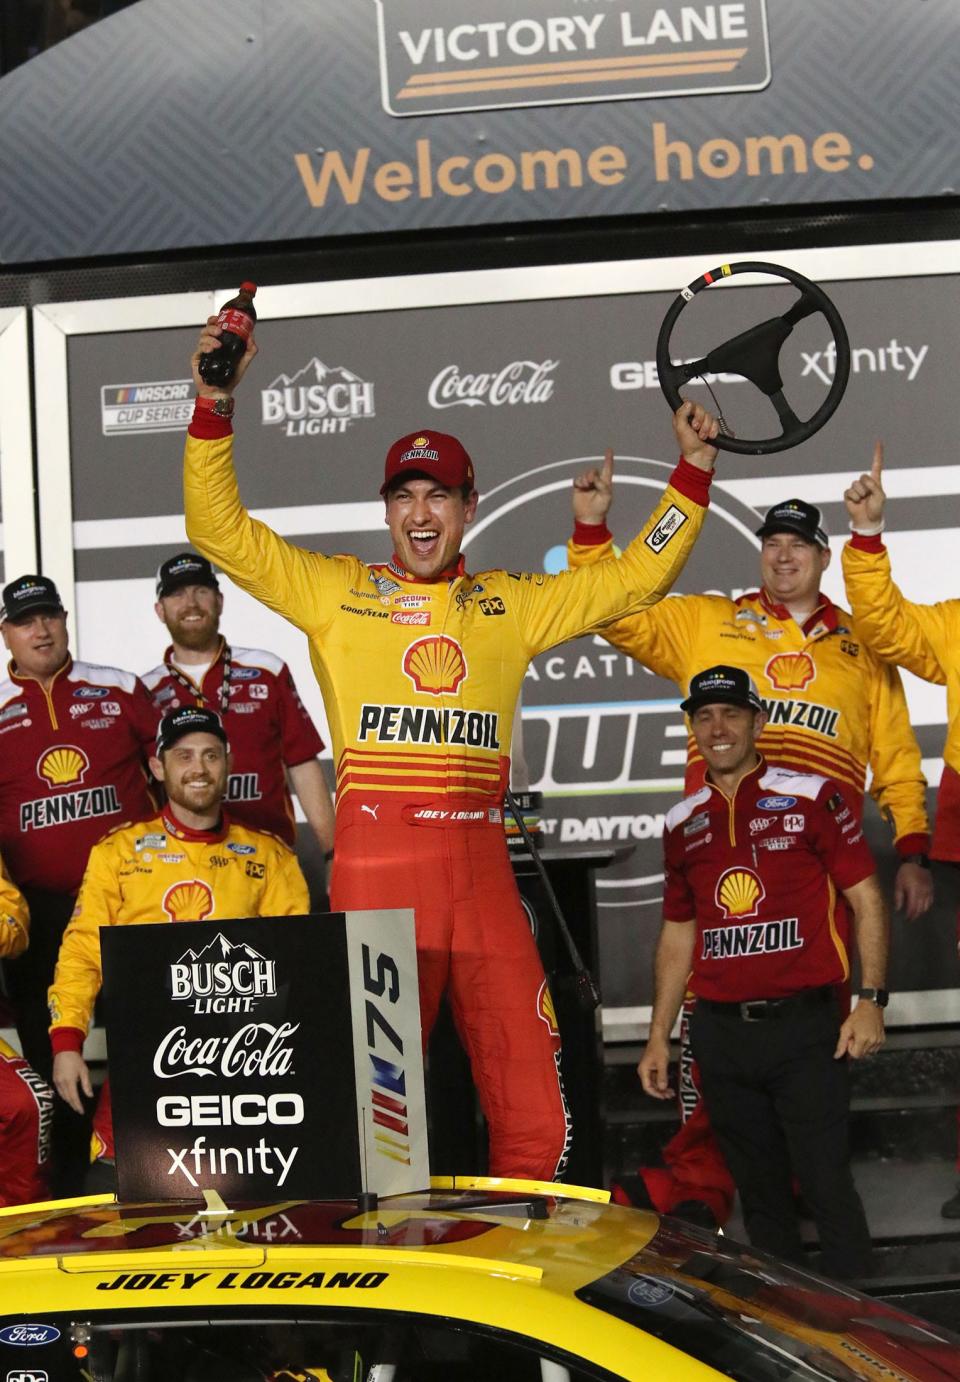 Joey Logano celebrates in Victory Lane after winning the first Bluegreen Vacations Duel race on Thursday at Daytona International Speedway.